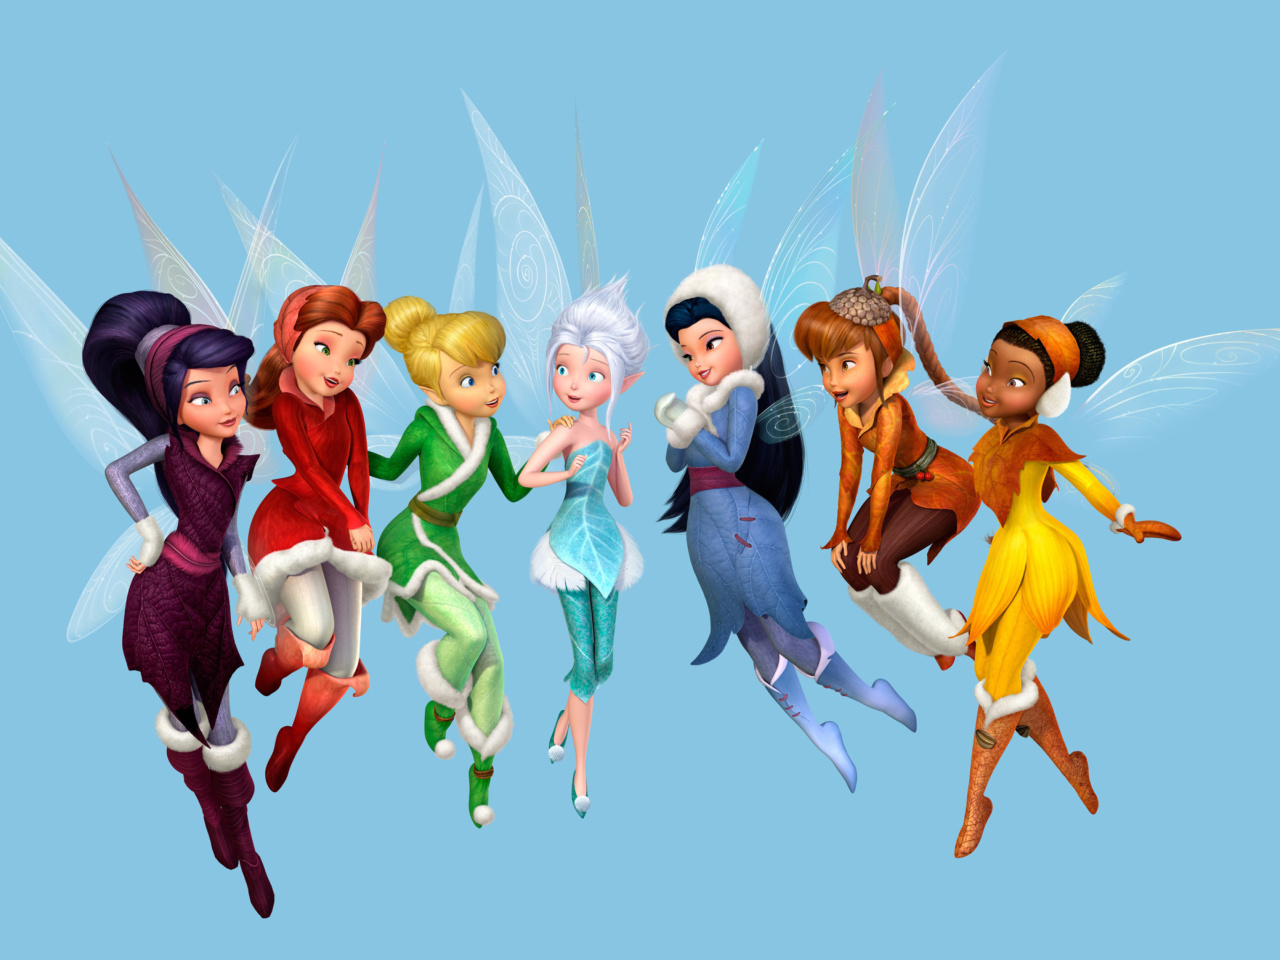 Das Tinkerbell and the Mysterious Winter Woods Wallpaper 1280x960